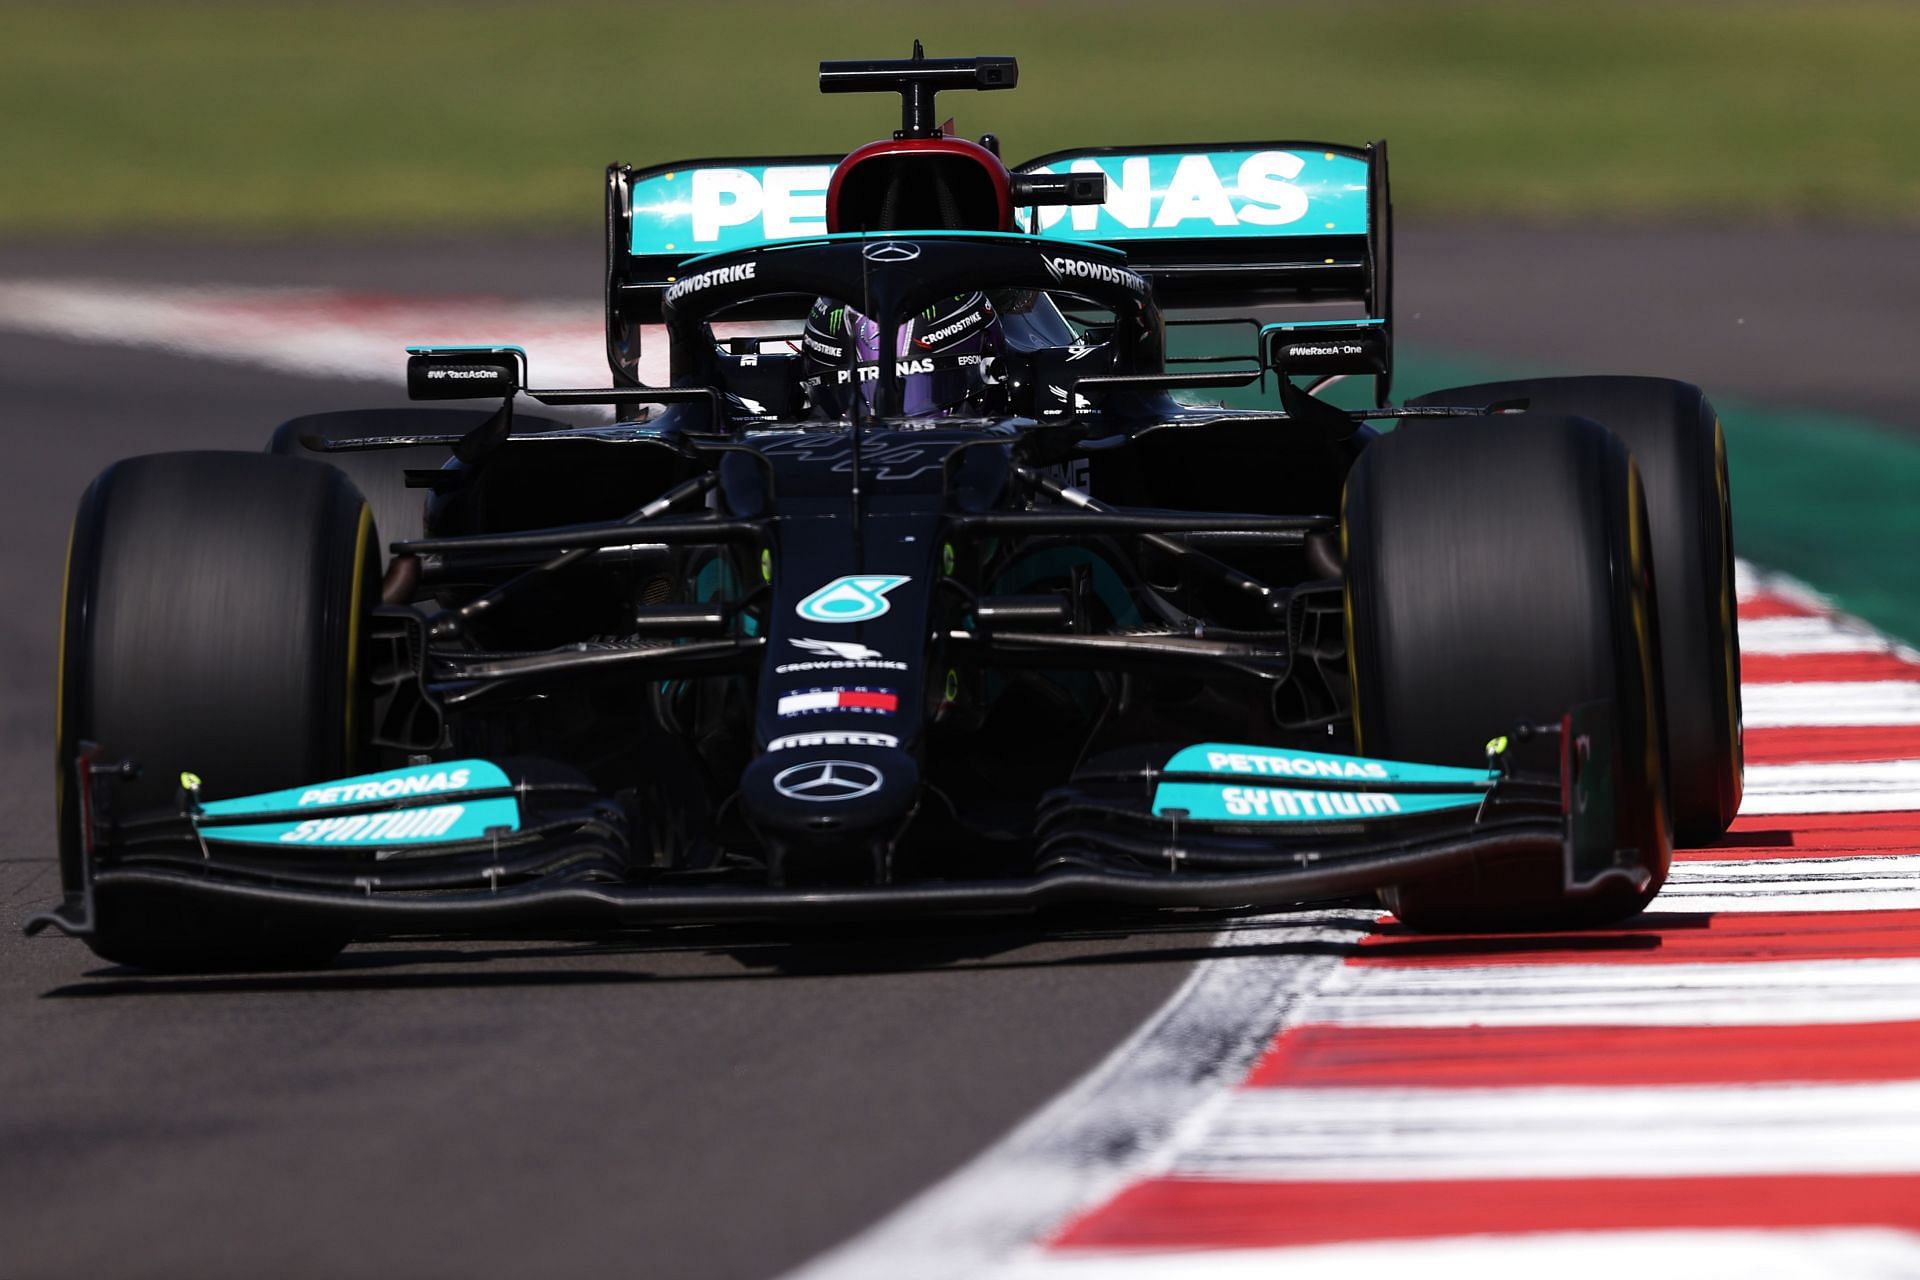 Mercedes expect to be closer to Red Bull Racing team at the Brazil Grand Prix. (Photo by Lars Baron/Getty Images)